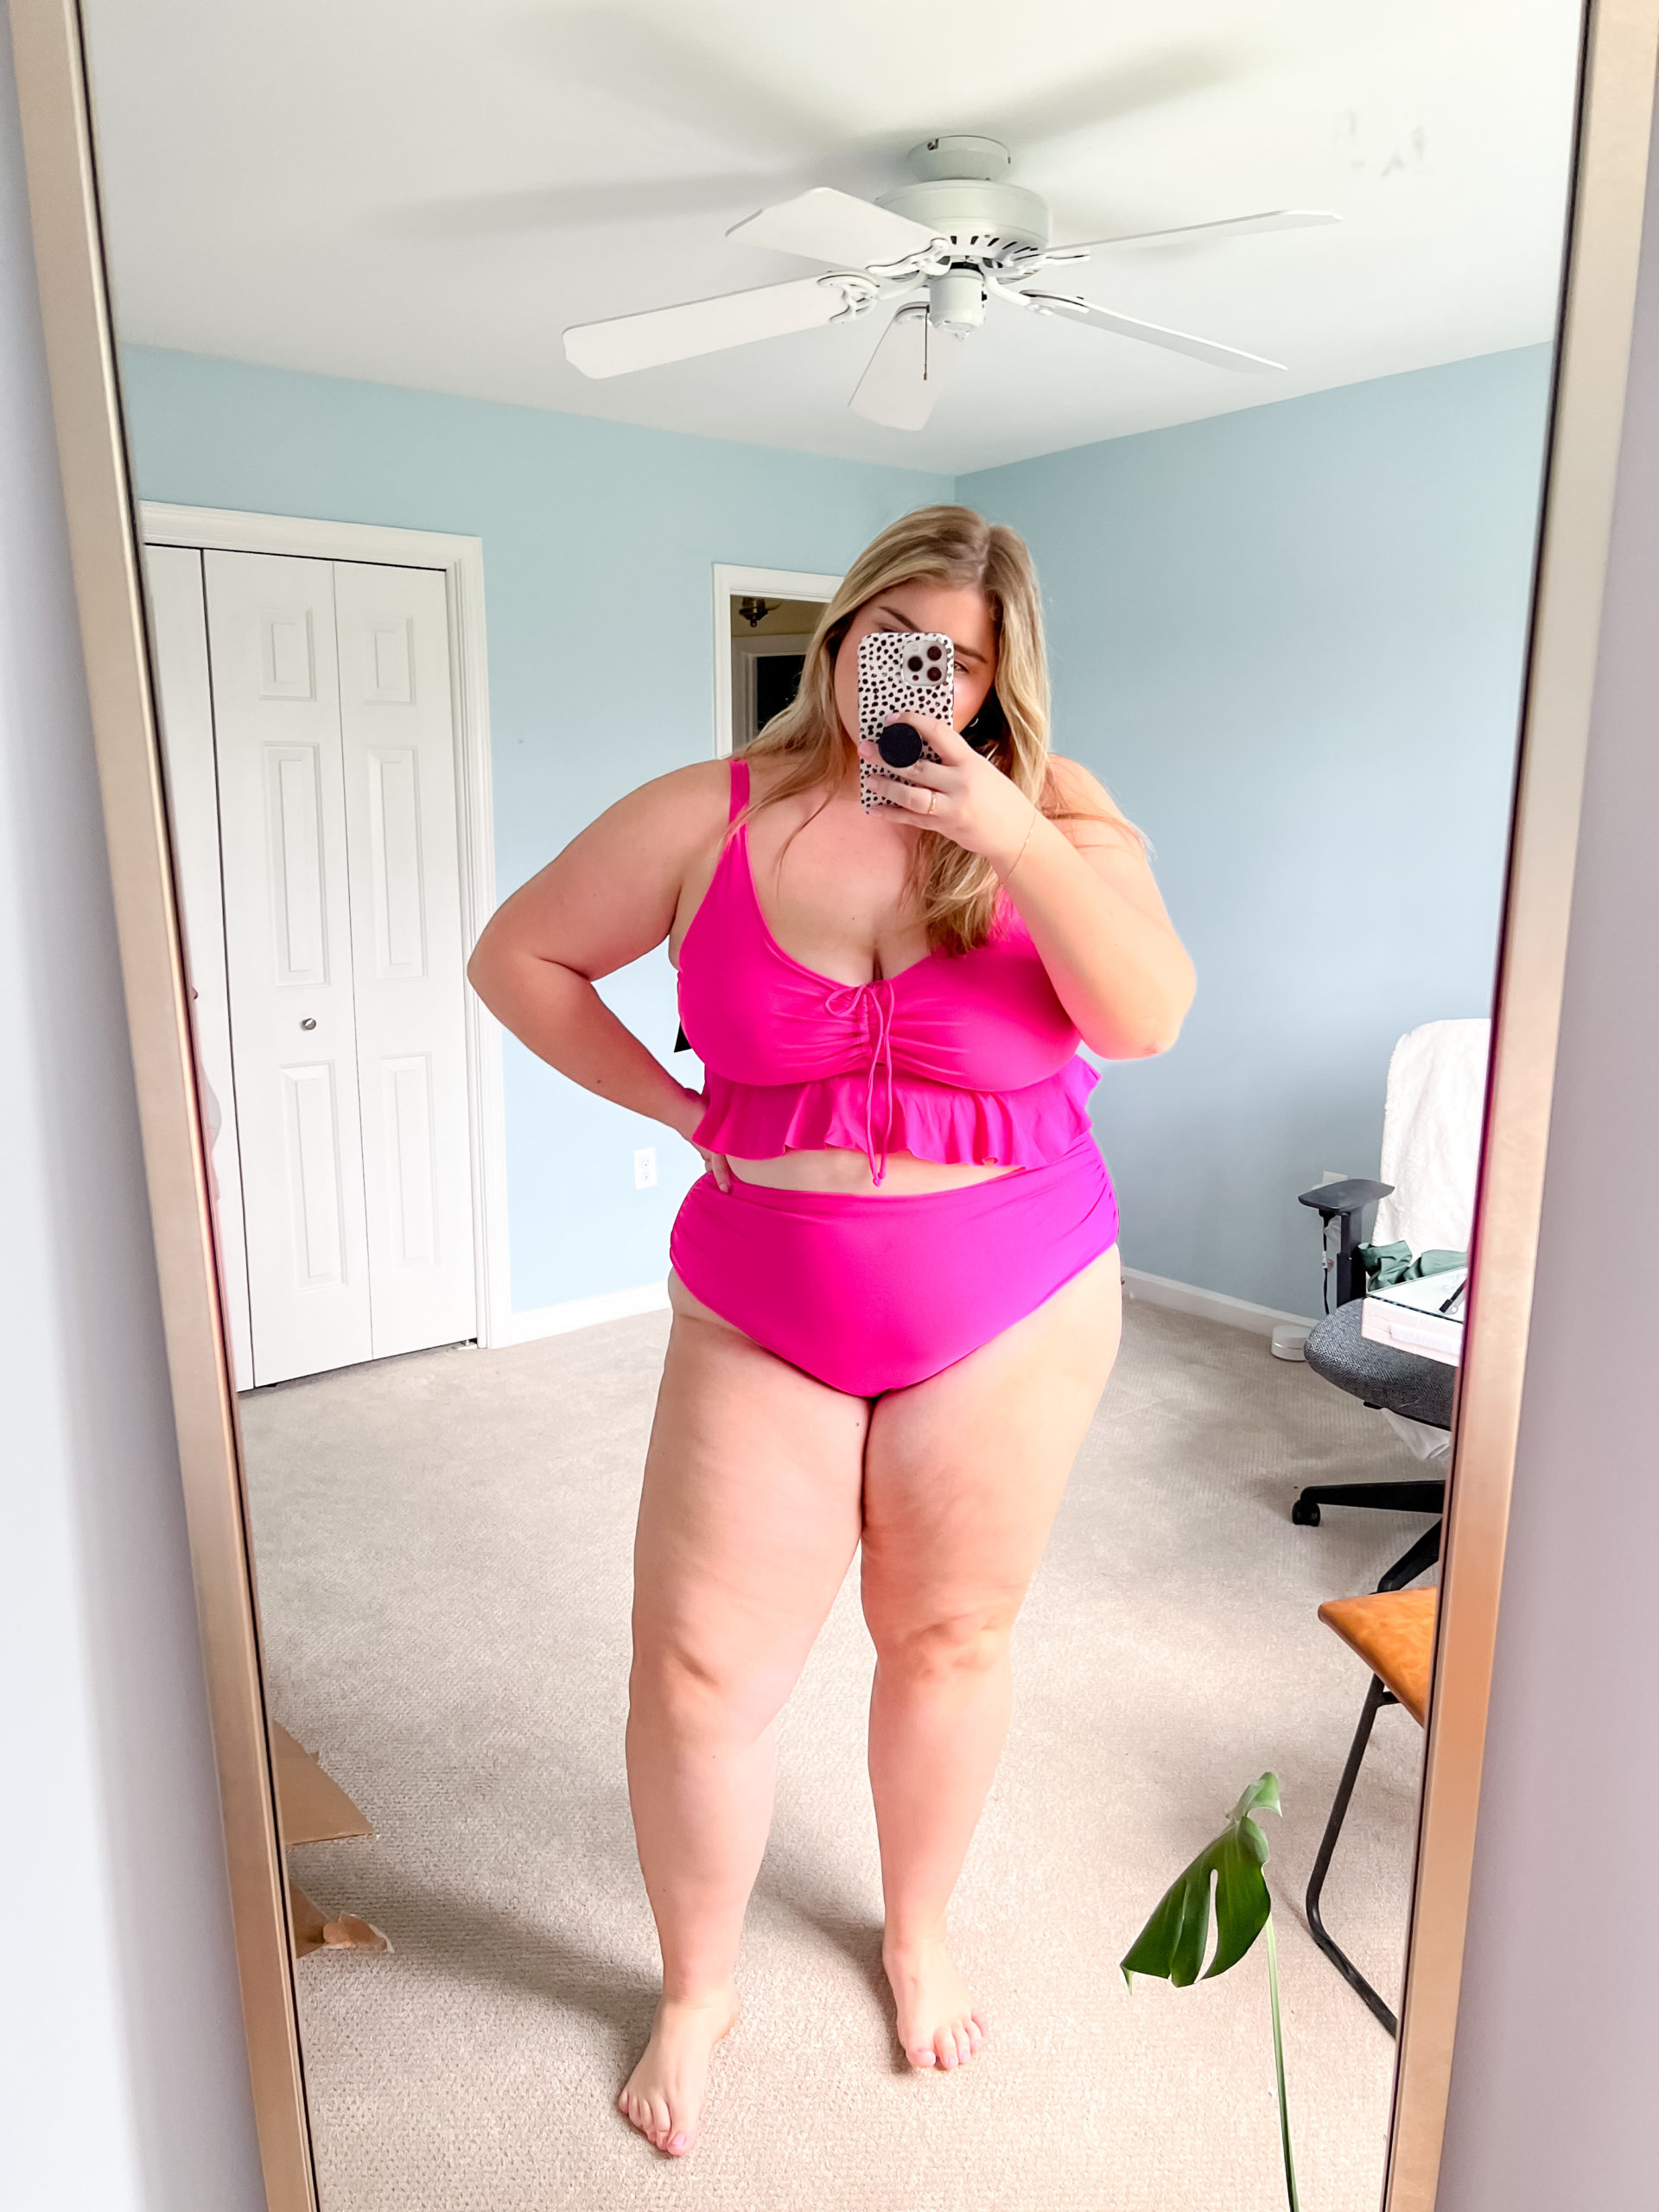 The Top Ten Plus-Size Swimsuits Dia & Co Customers Are Loving